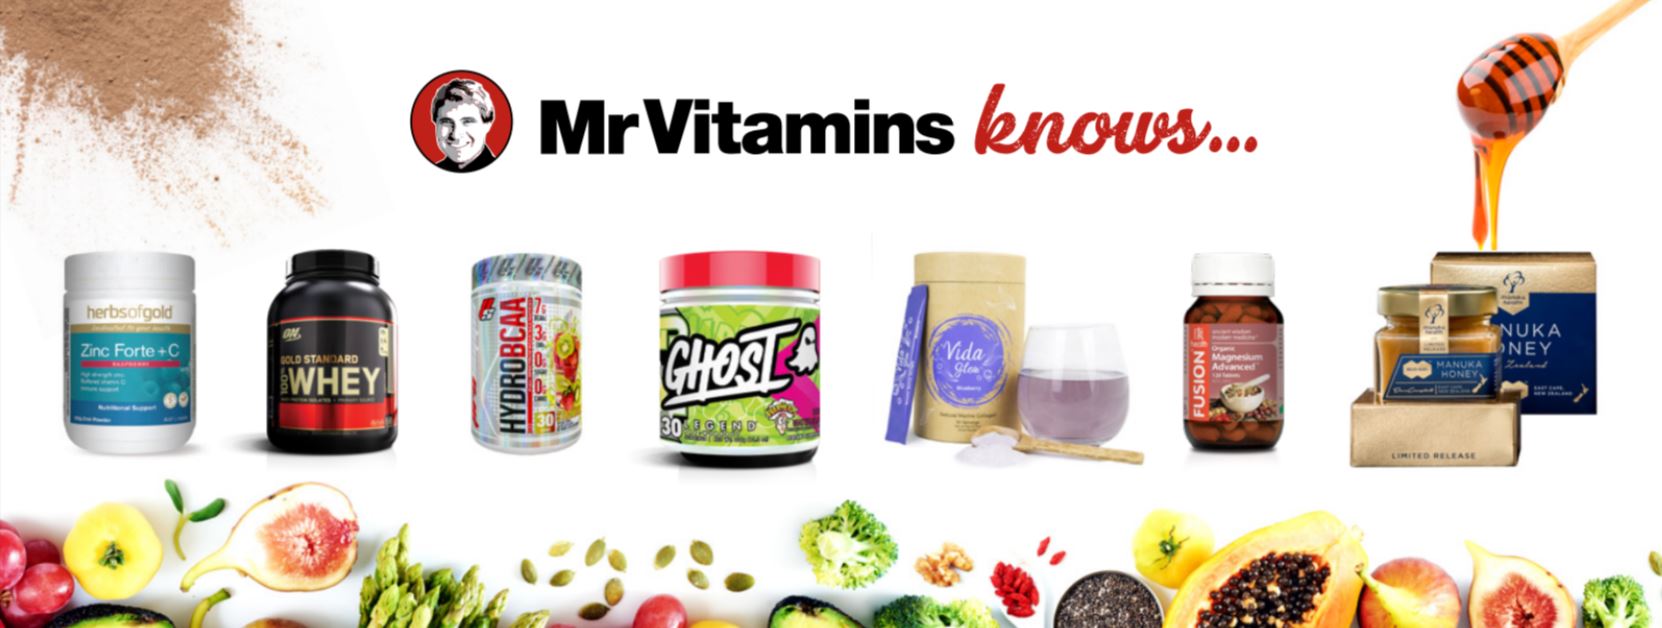 Mr Vitamins up to 50% OFF on selected brands. Super Tuesday sale